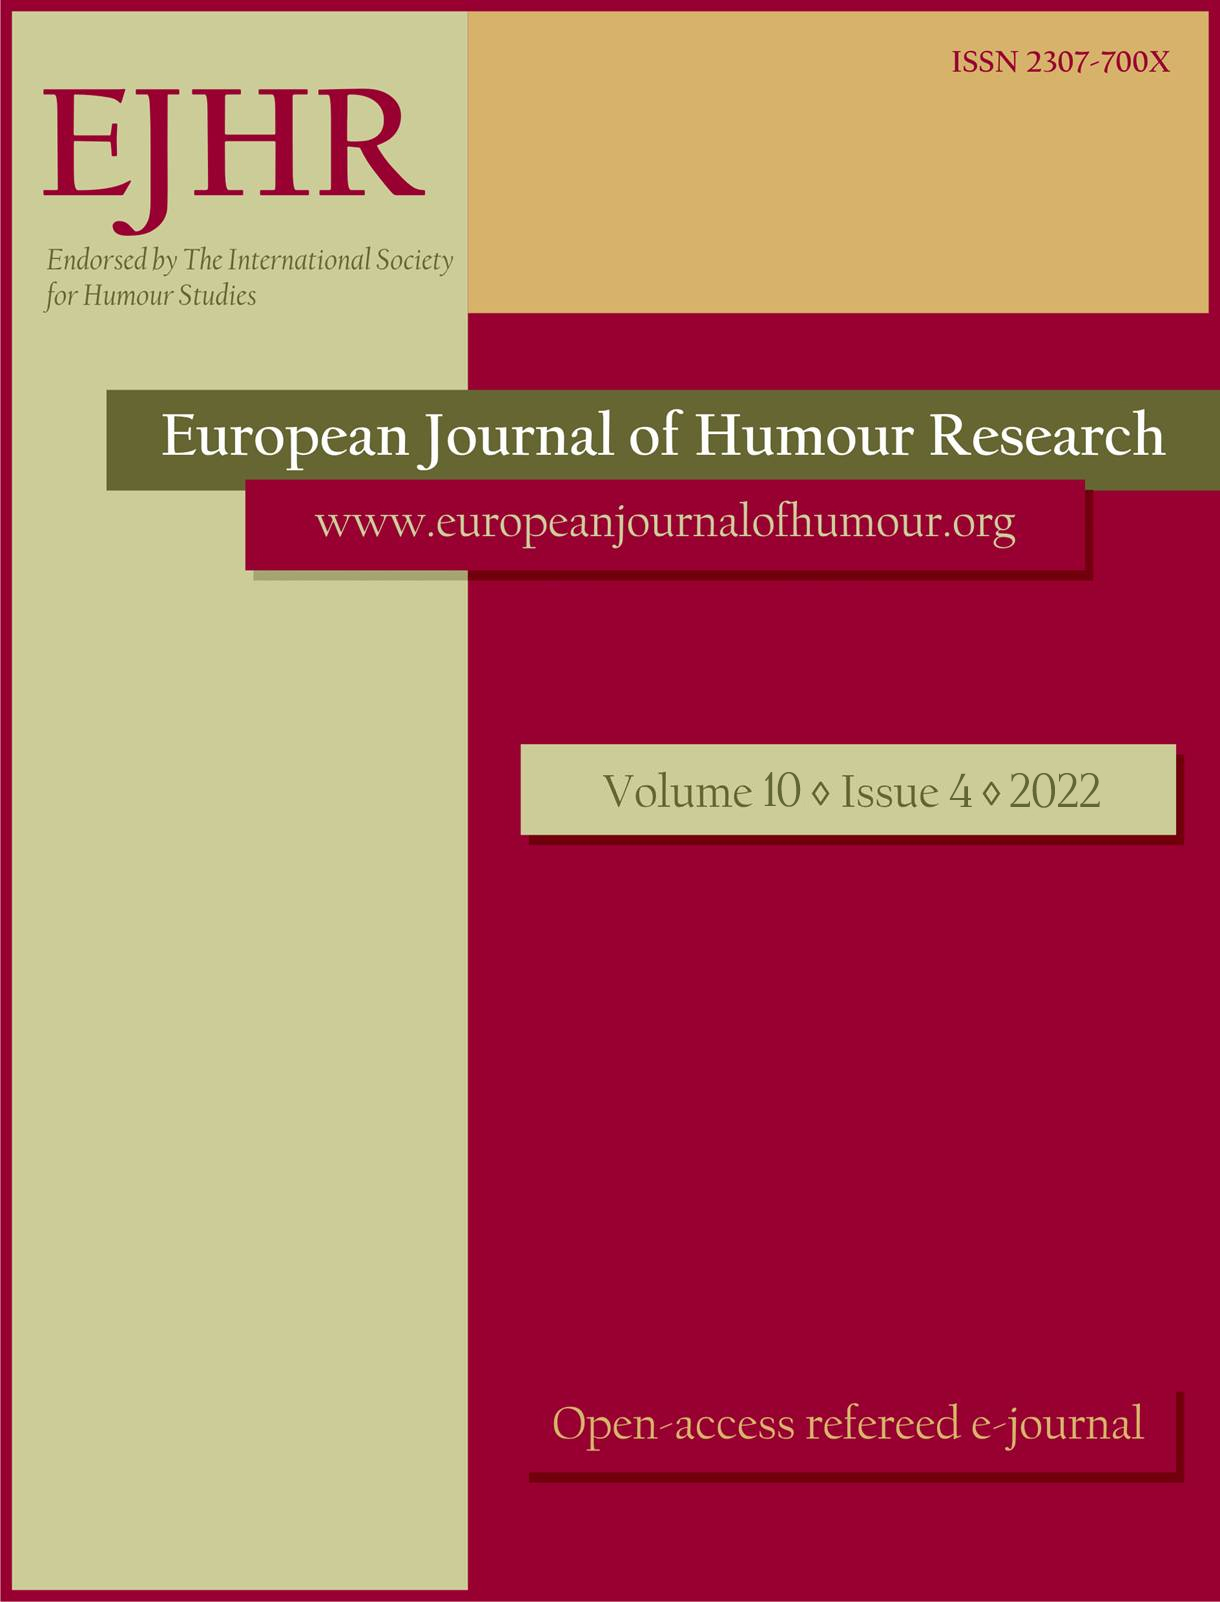 Scrapbook for the 10th anniversary of the European Journal of Humour Research Cover Image